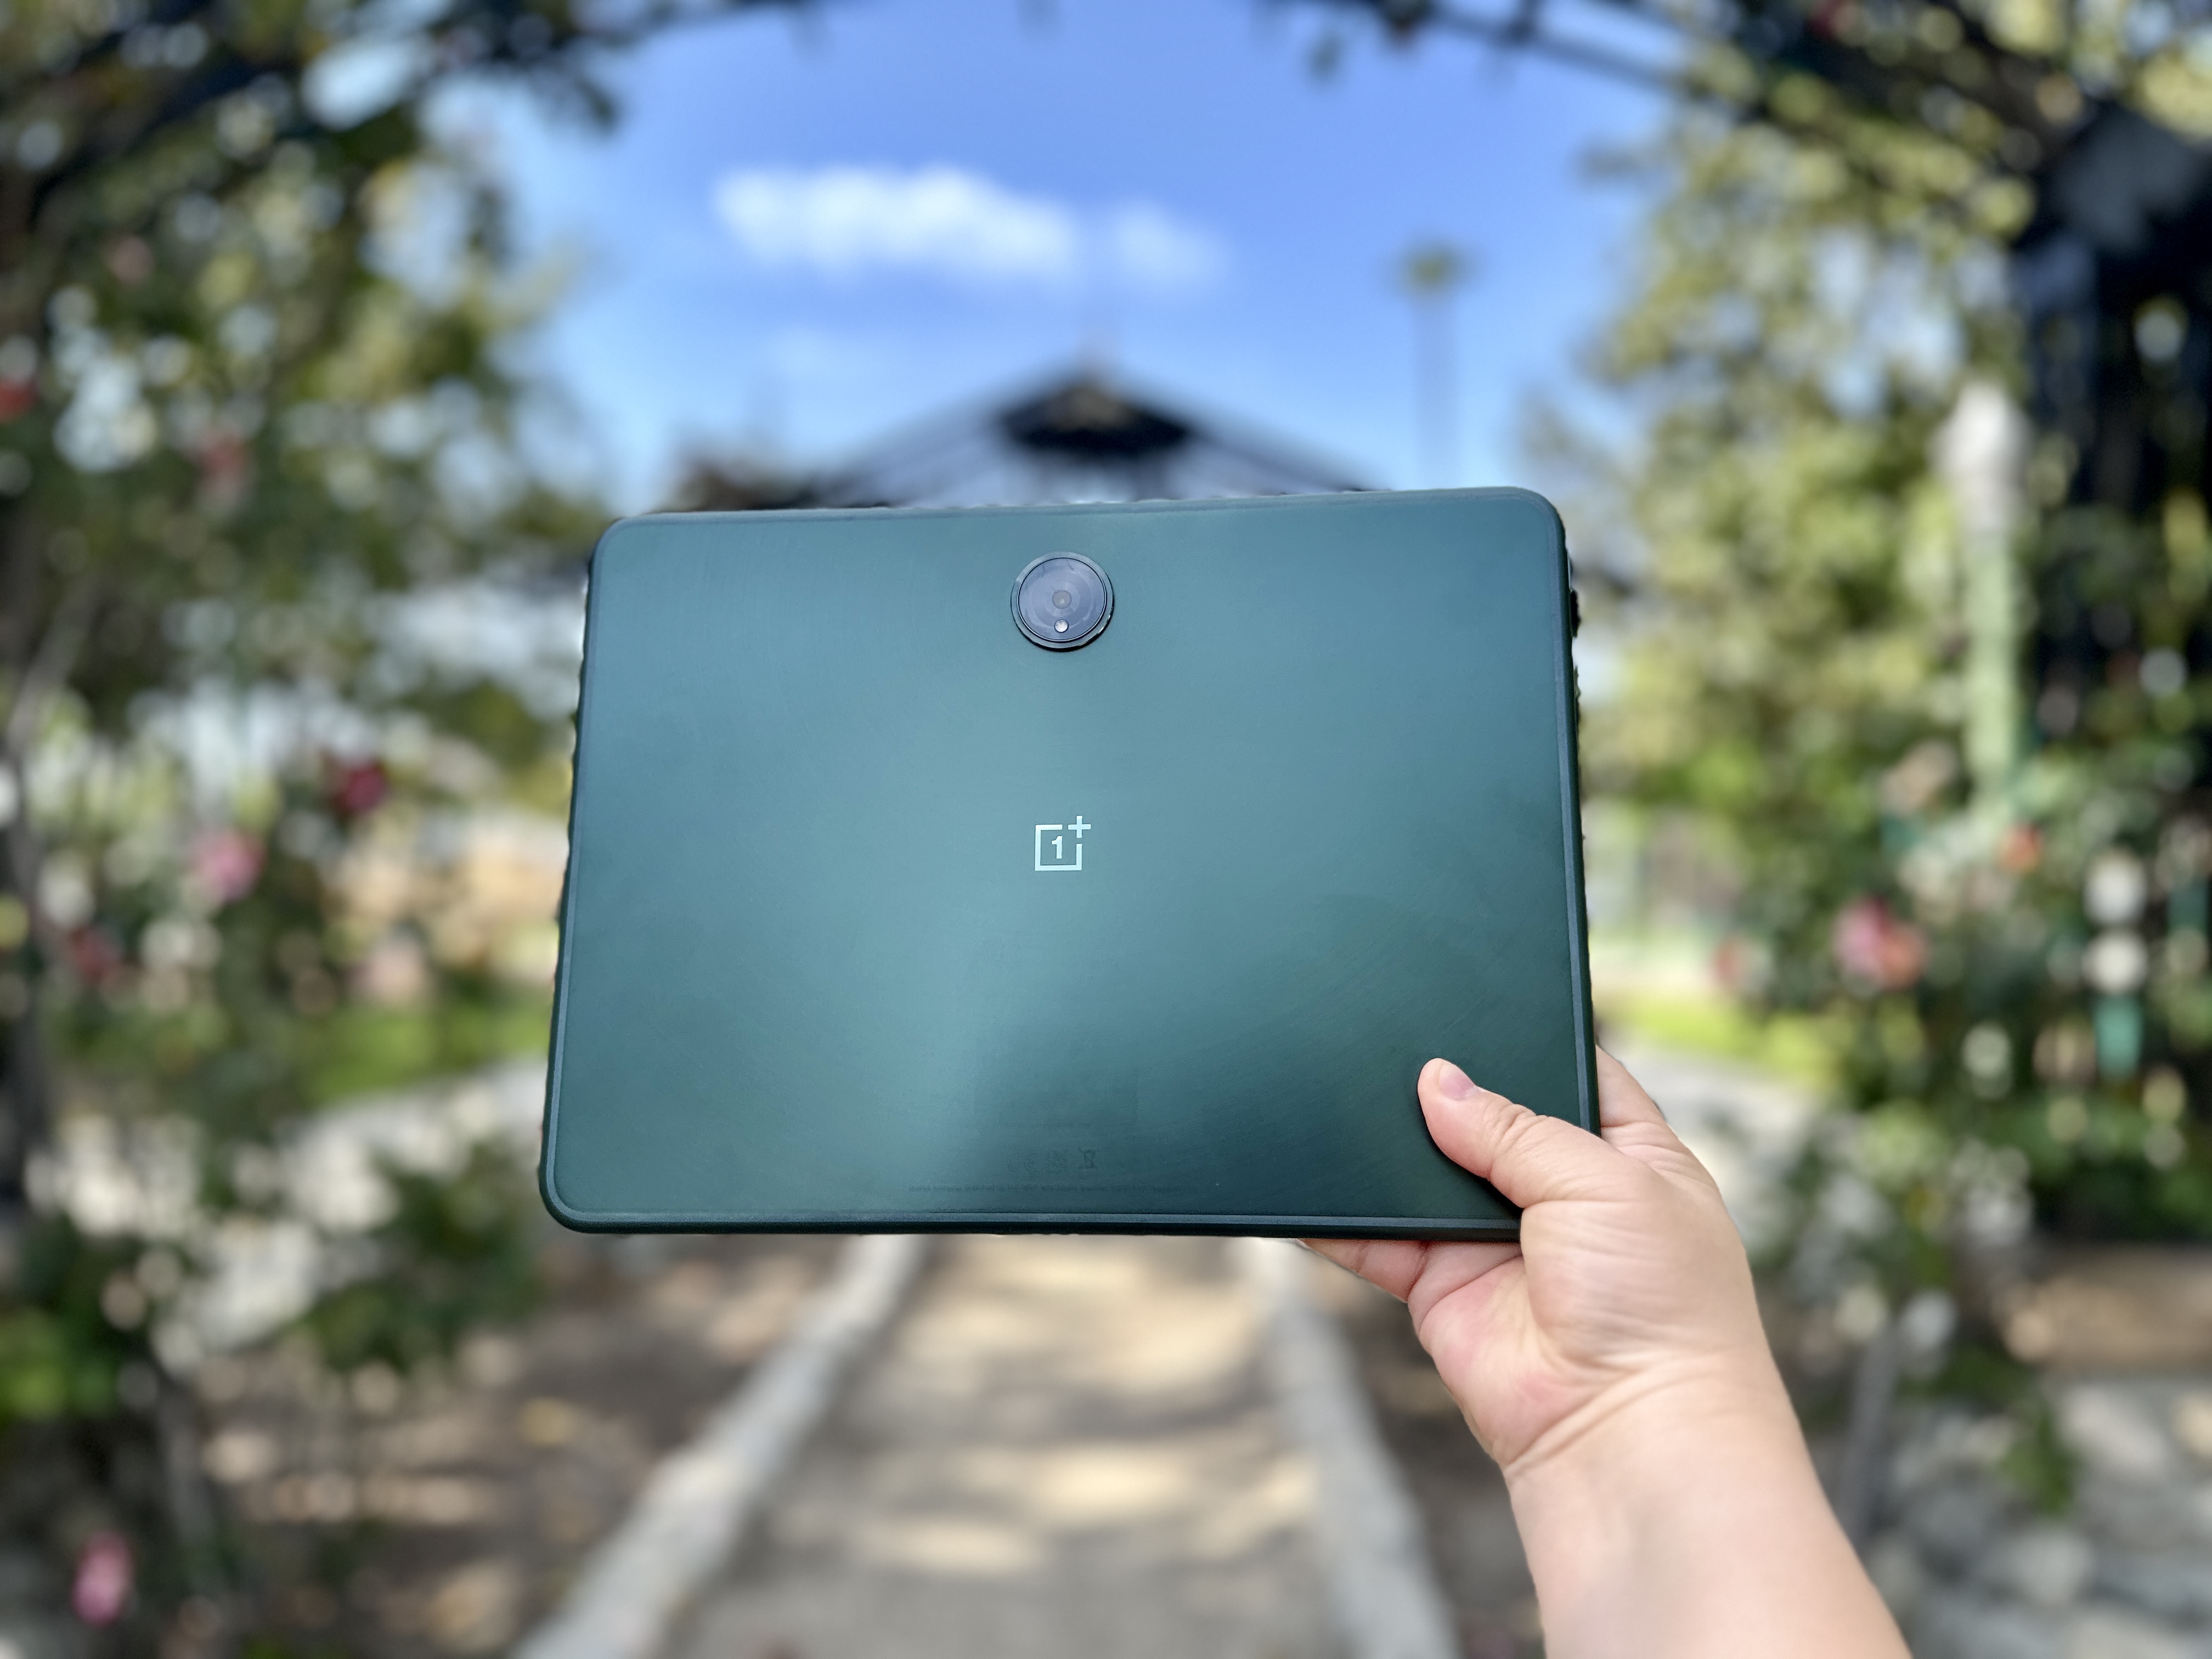 OnePlus Pad held in hand